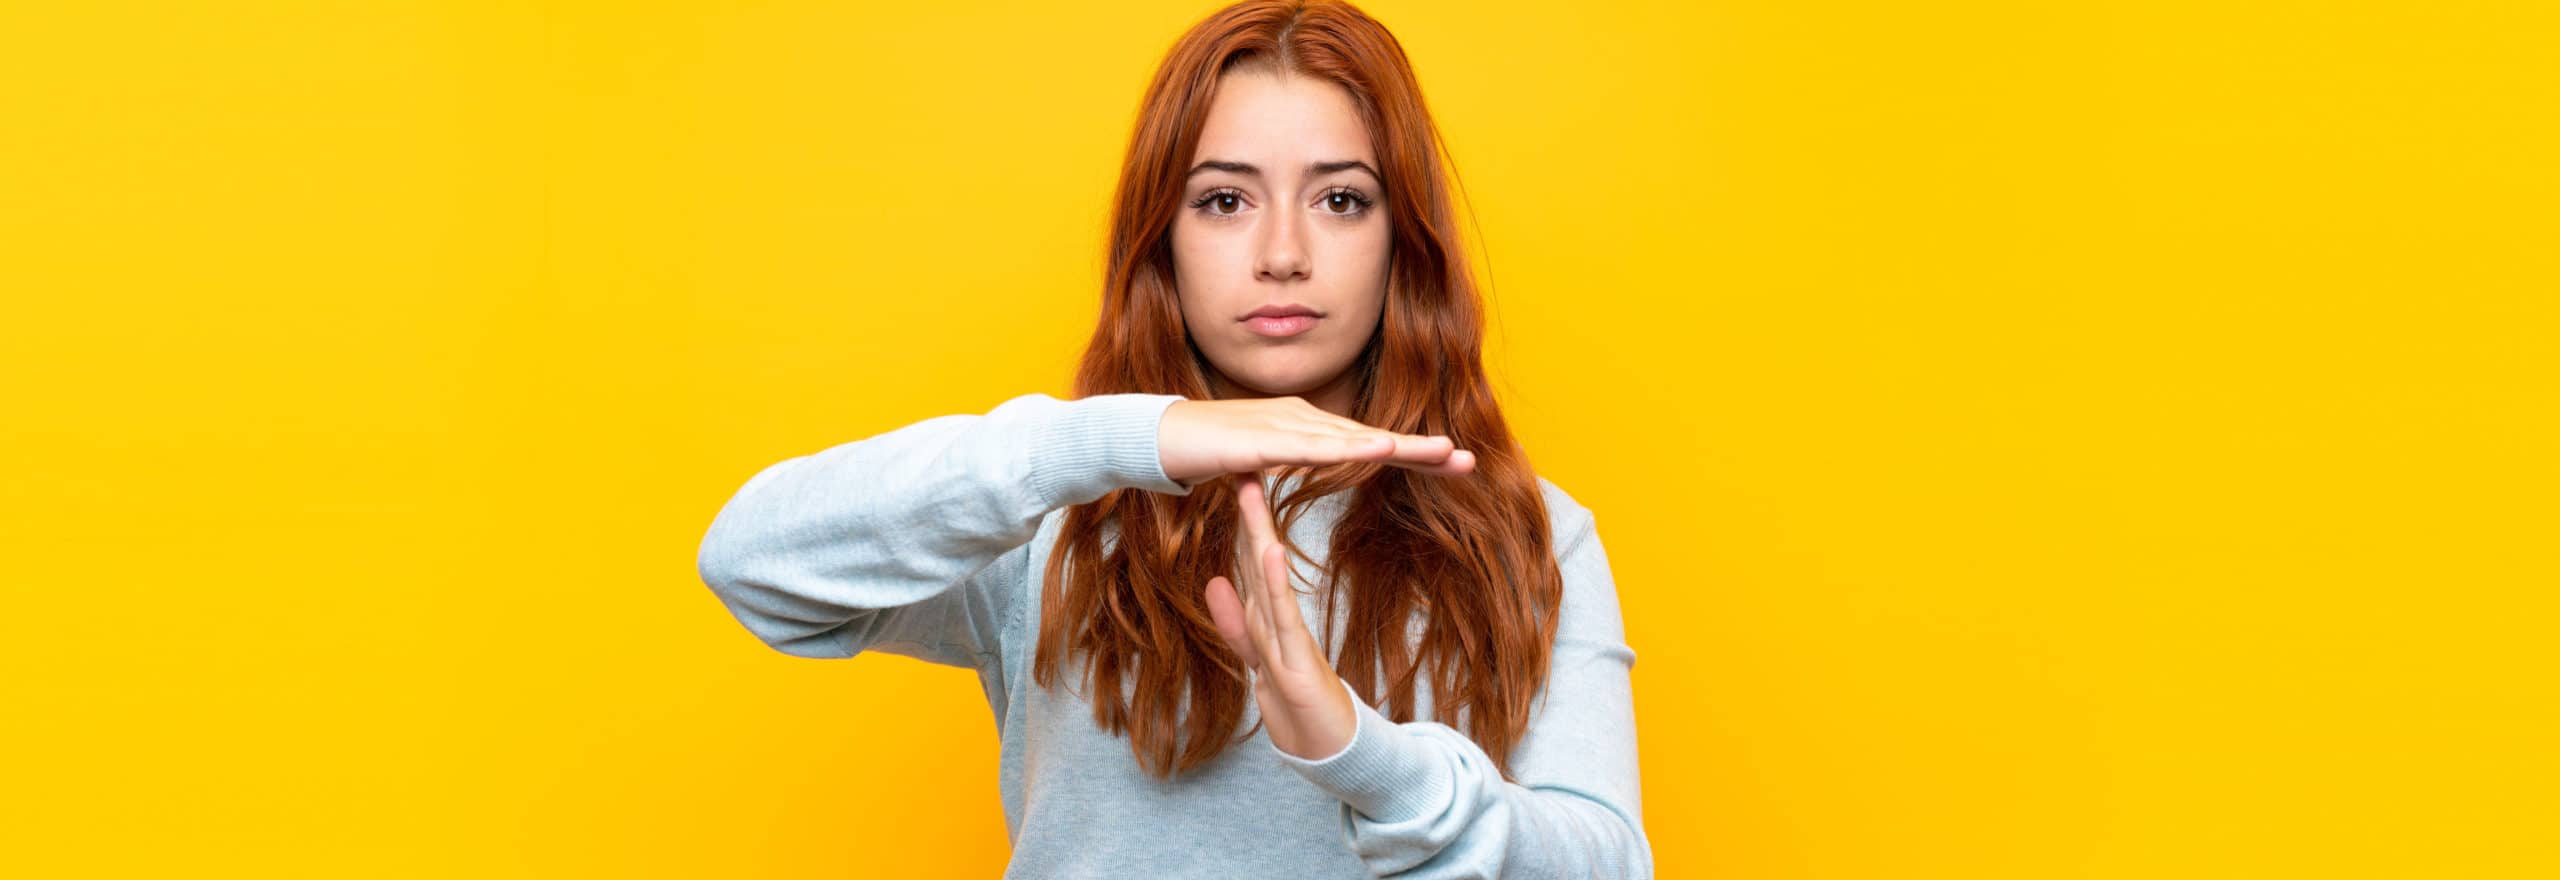 Teenager redhead girl over isolated yellow background making time out gesture Von luismolinero